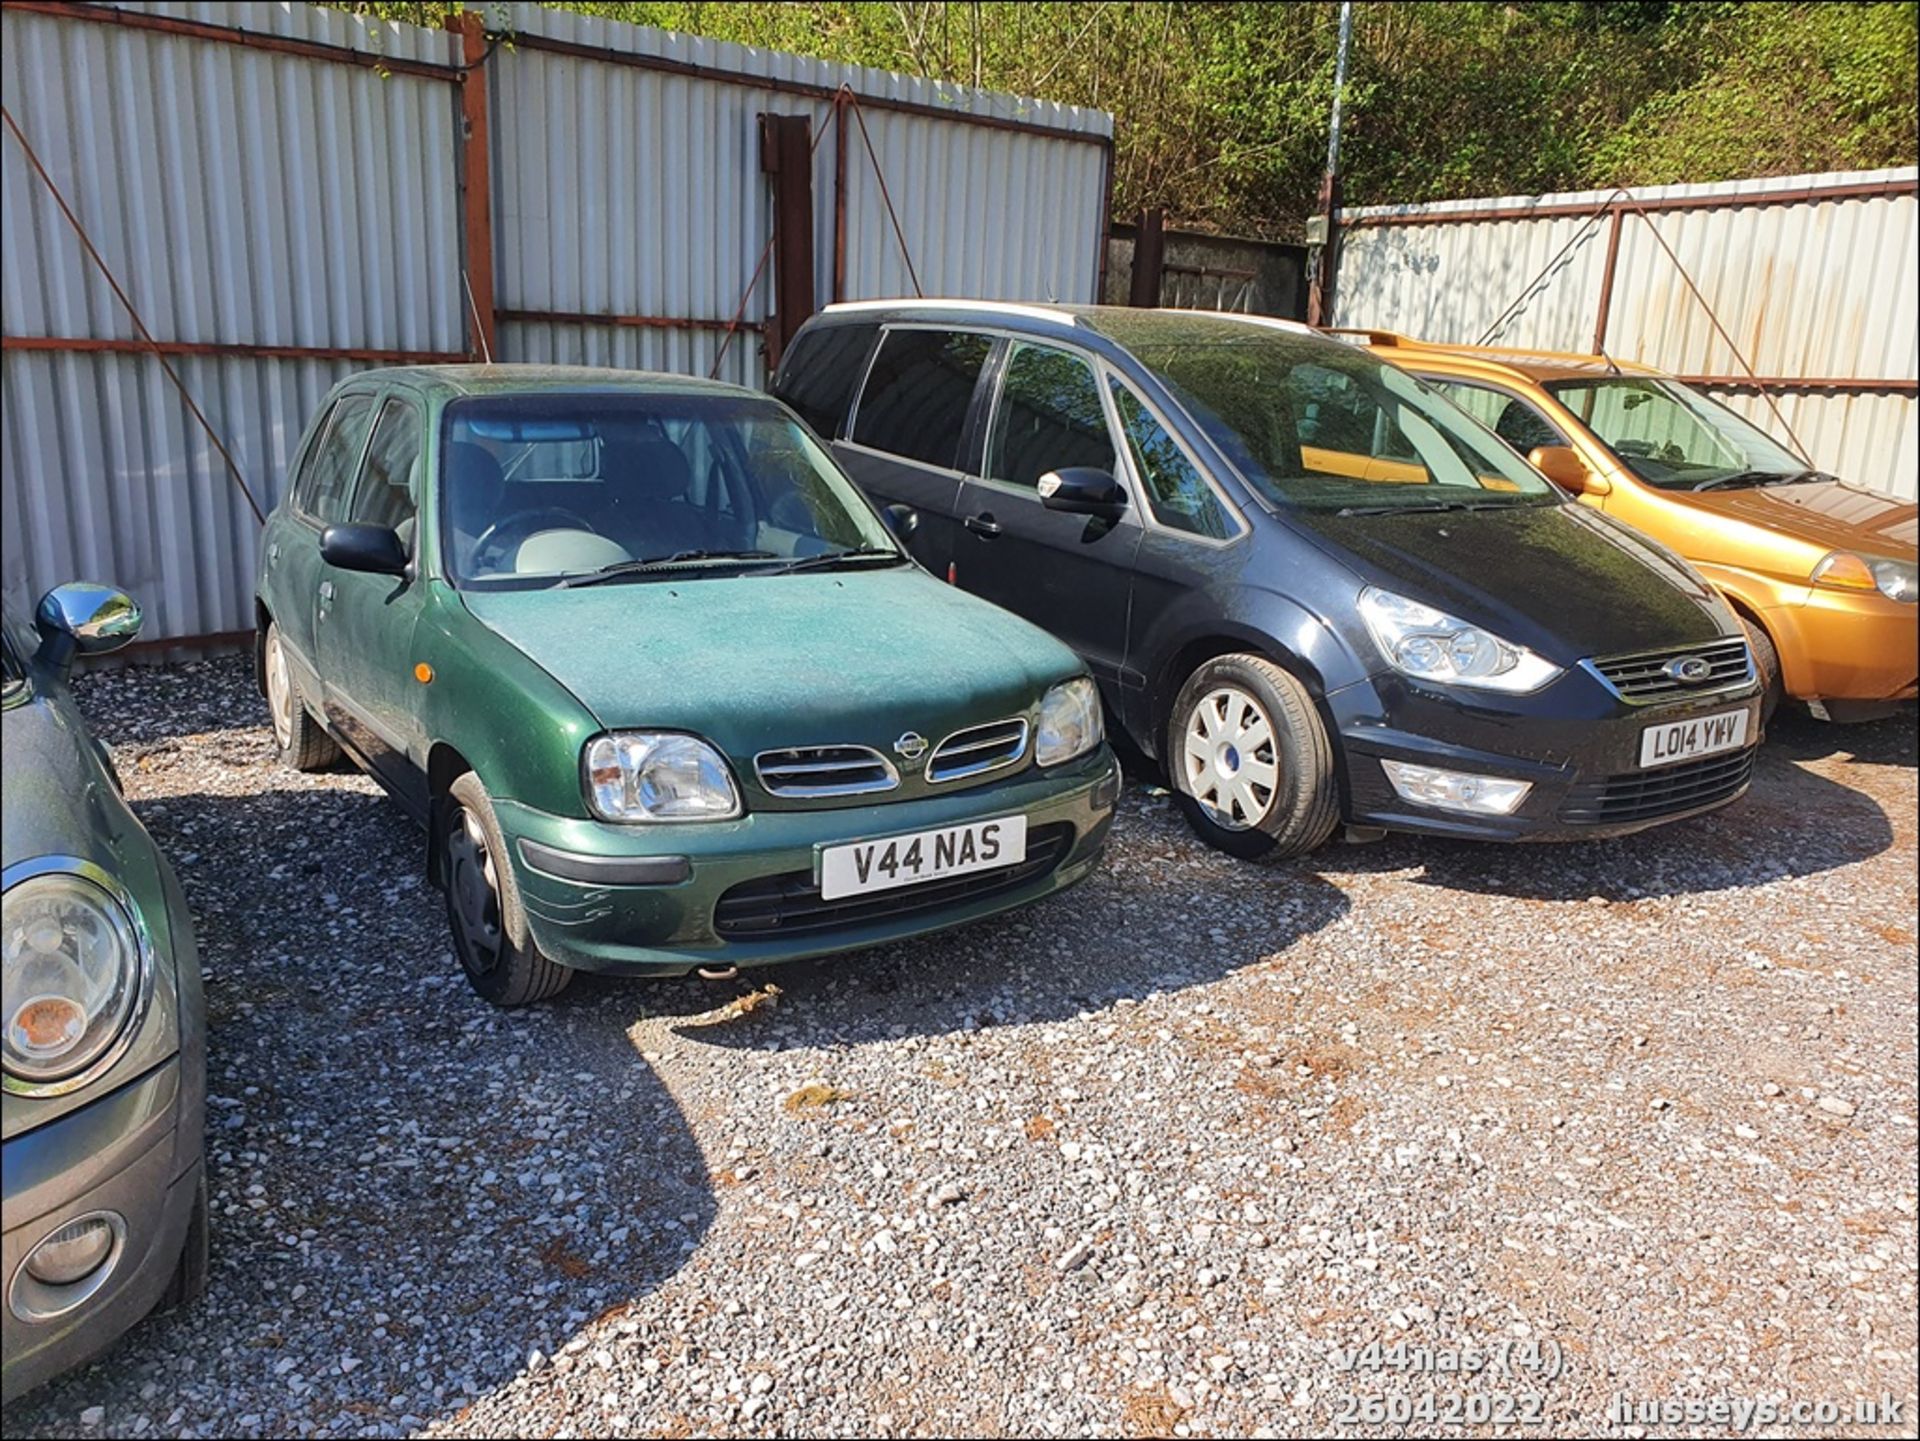 1999 NISSAN MICRA GX AUTO - 1275cc 5dr Hatchback (Green) - Image 4 of 21